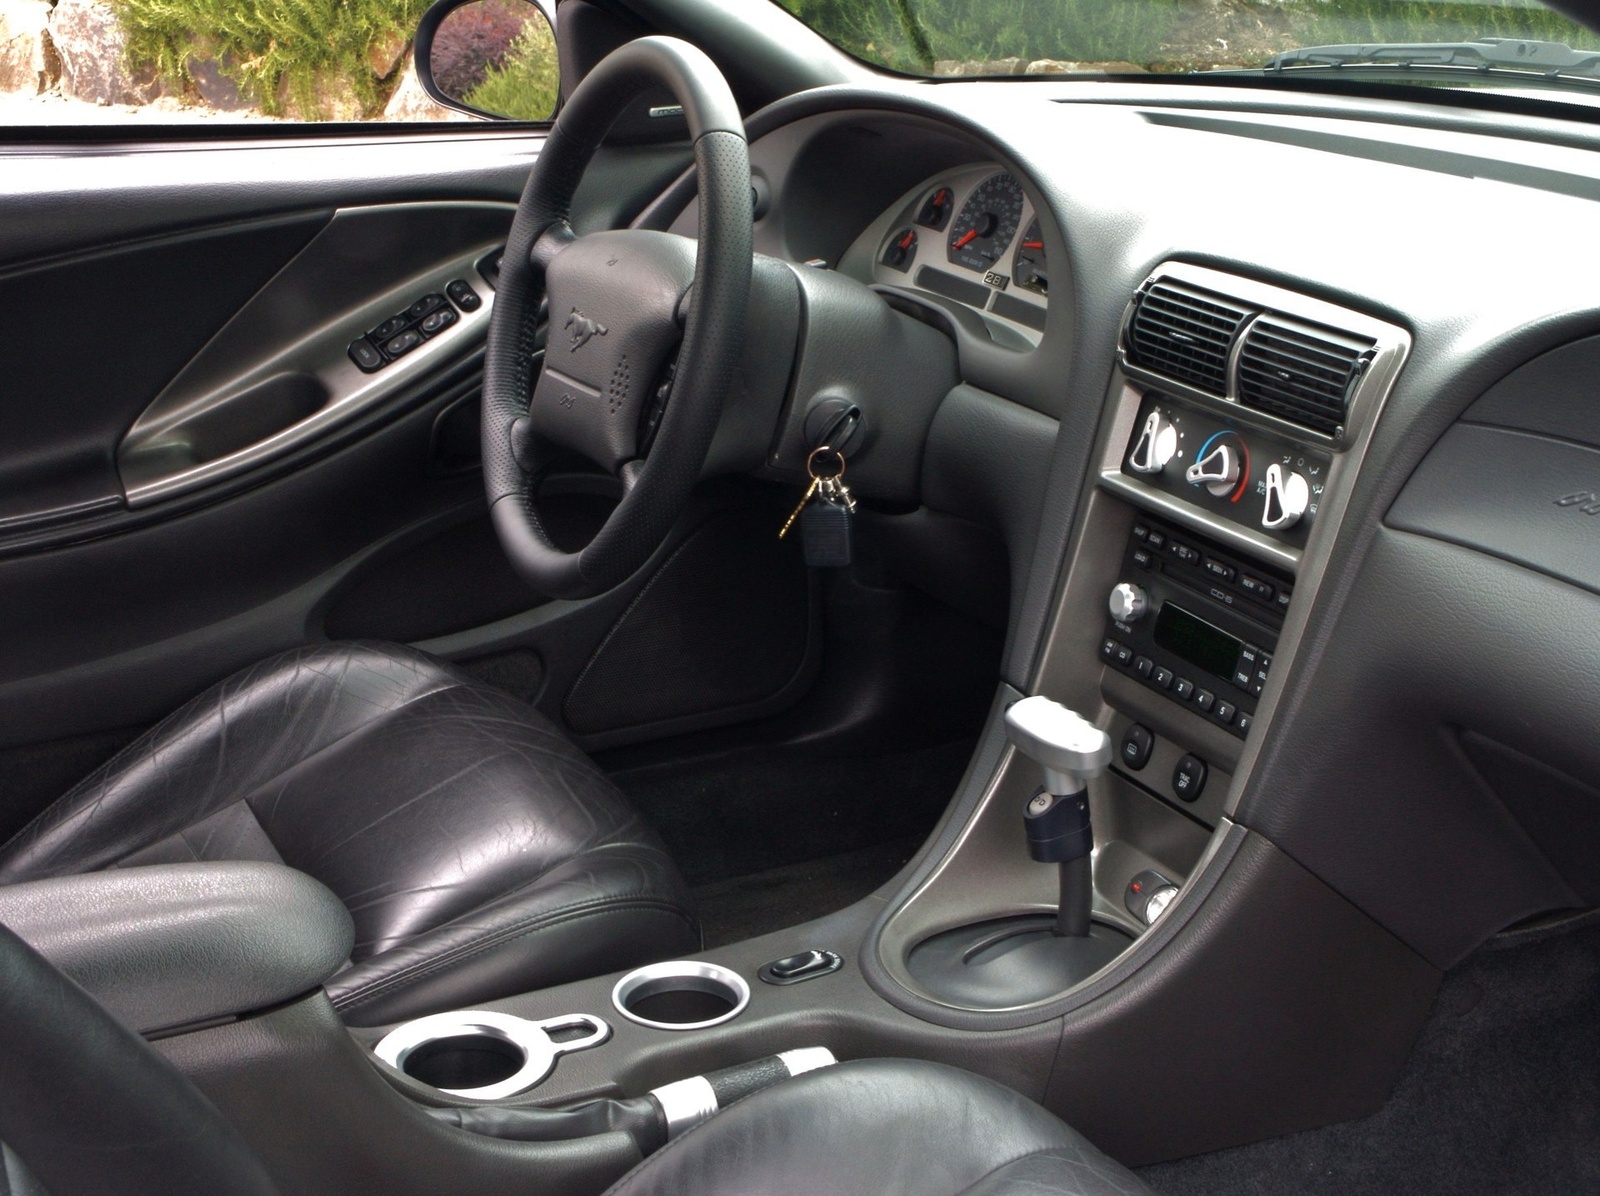 2002 Ford mustang gt seats #2